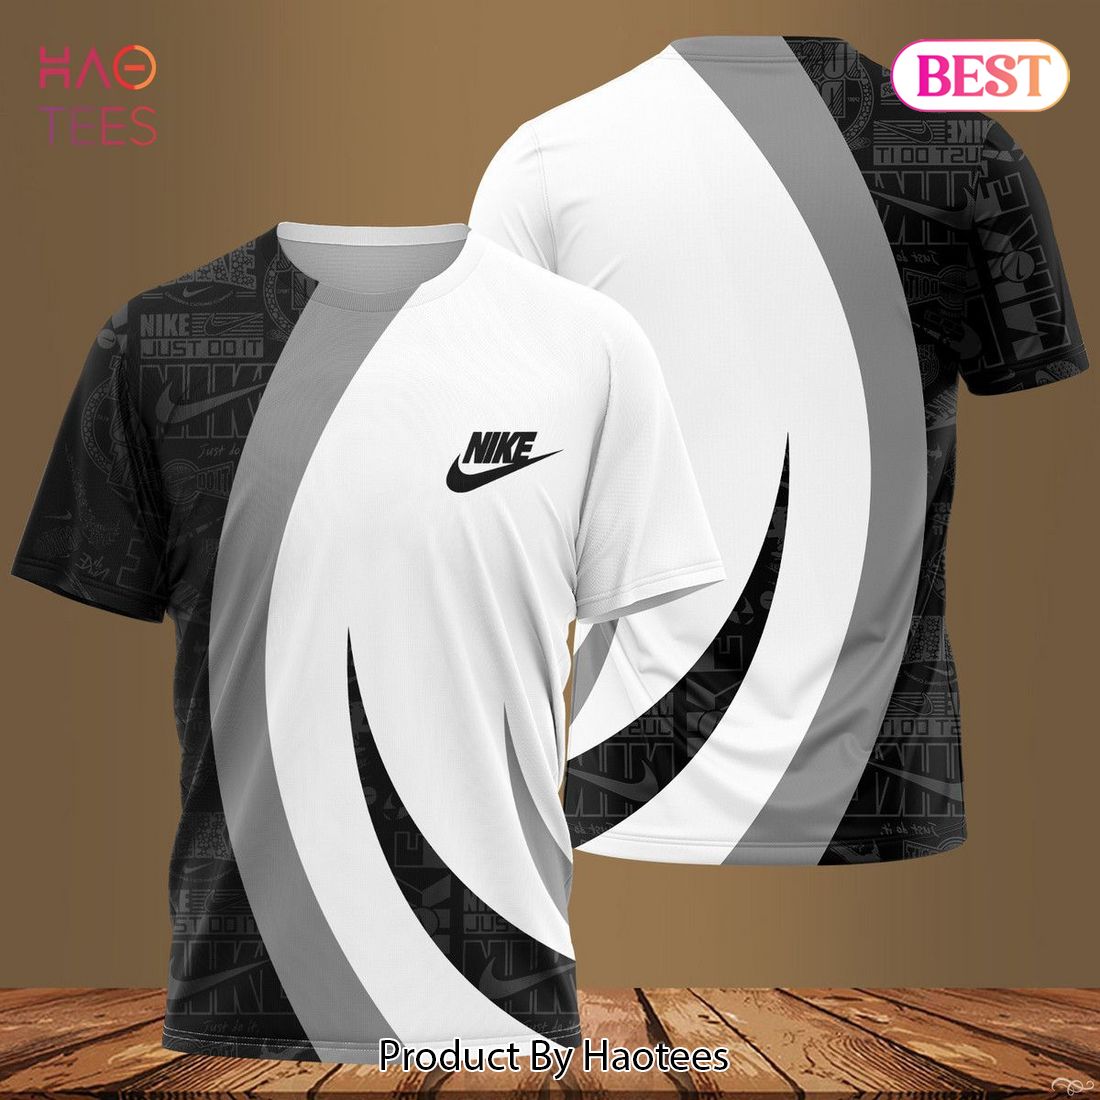 THE BEST Nike Black Logo Luxury Brand 3D T-Shirt Limited Edition